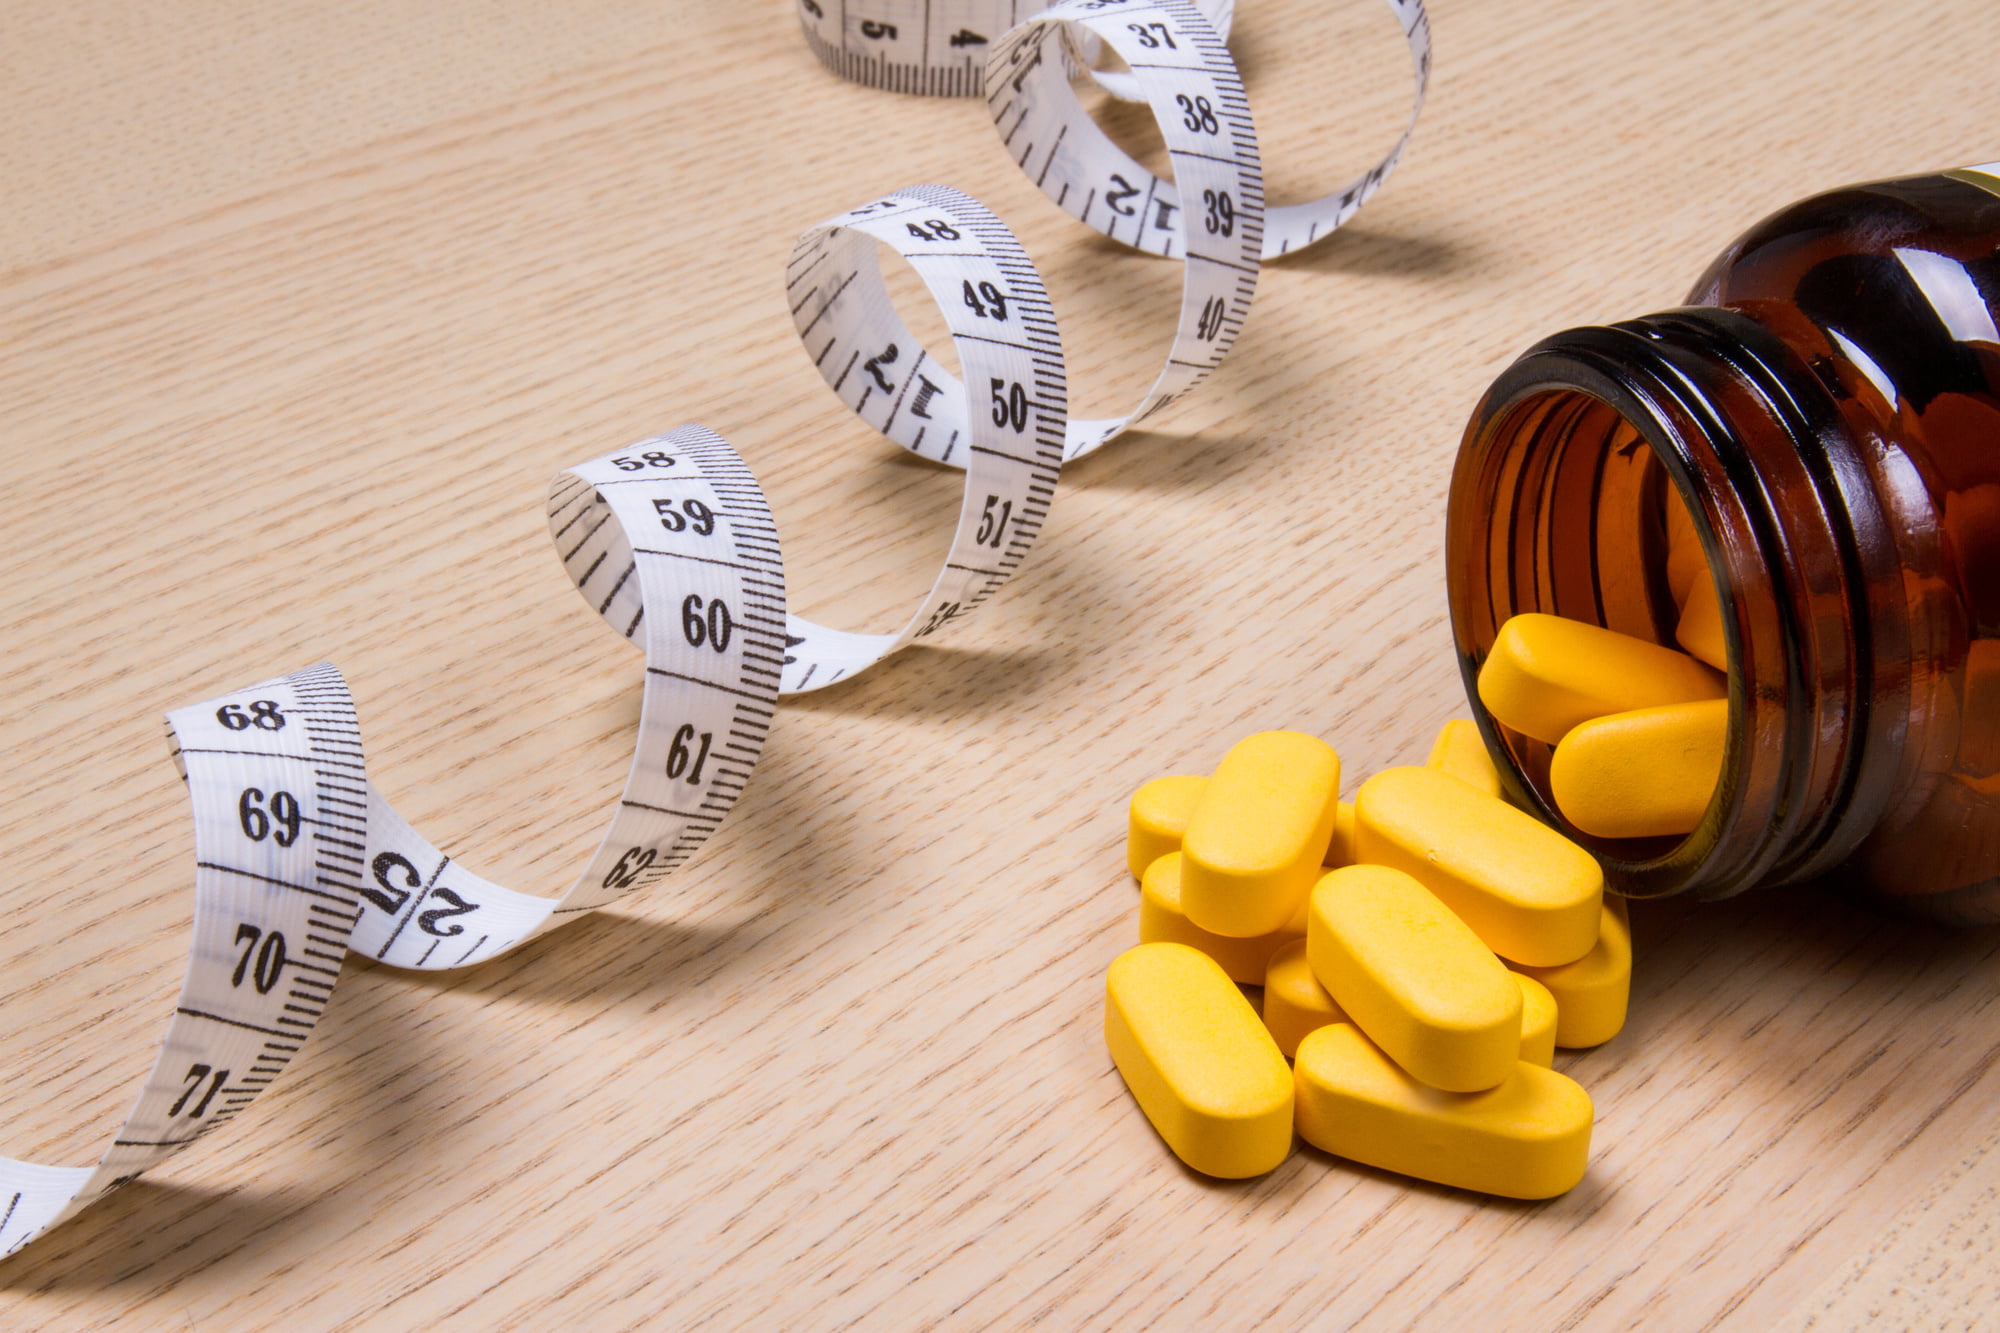 You may have heard about weight loss pills helping people achieve their weight loss goals. Should you try using them, too? Here's what to consider.